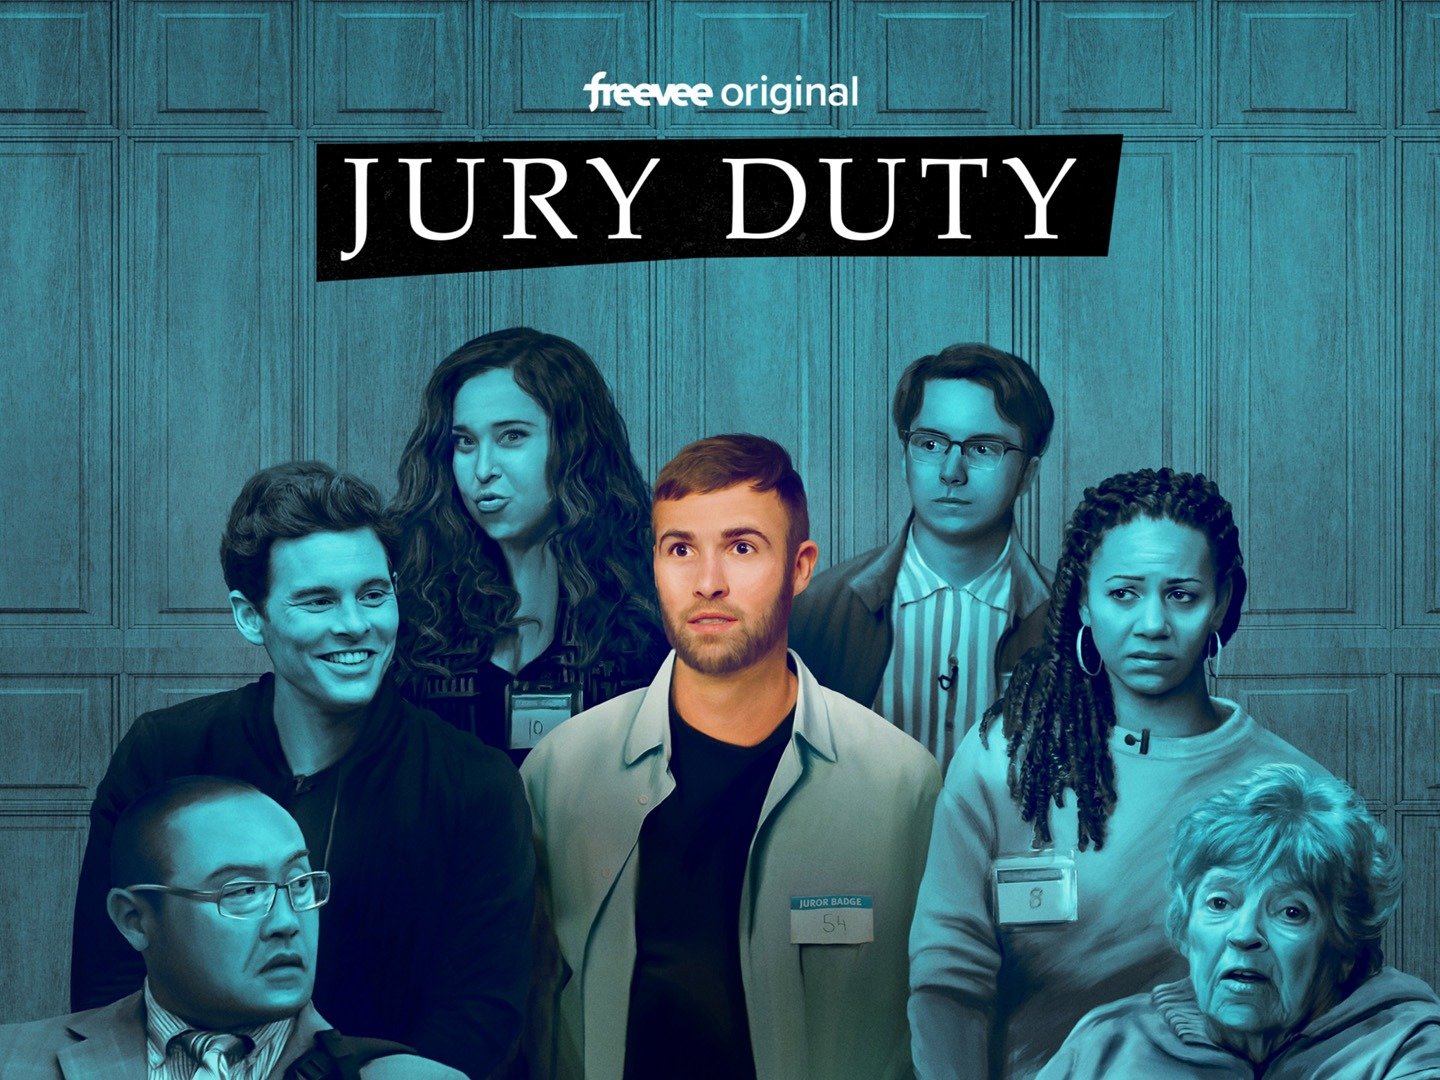 Jury Duty A Cast Commentary version of the comedy show is heading our